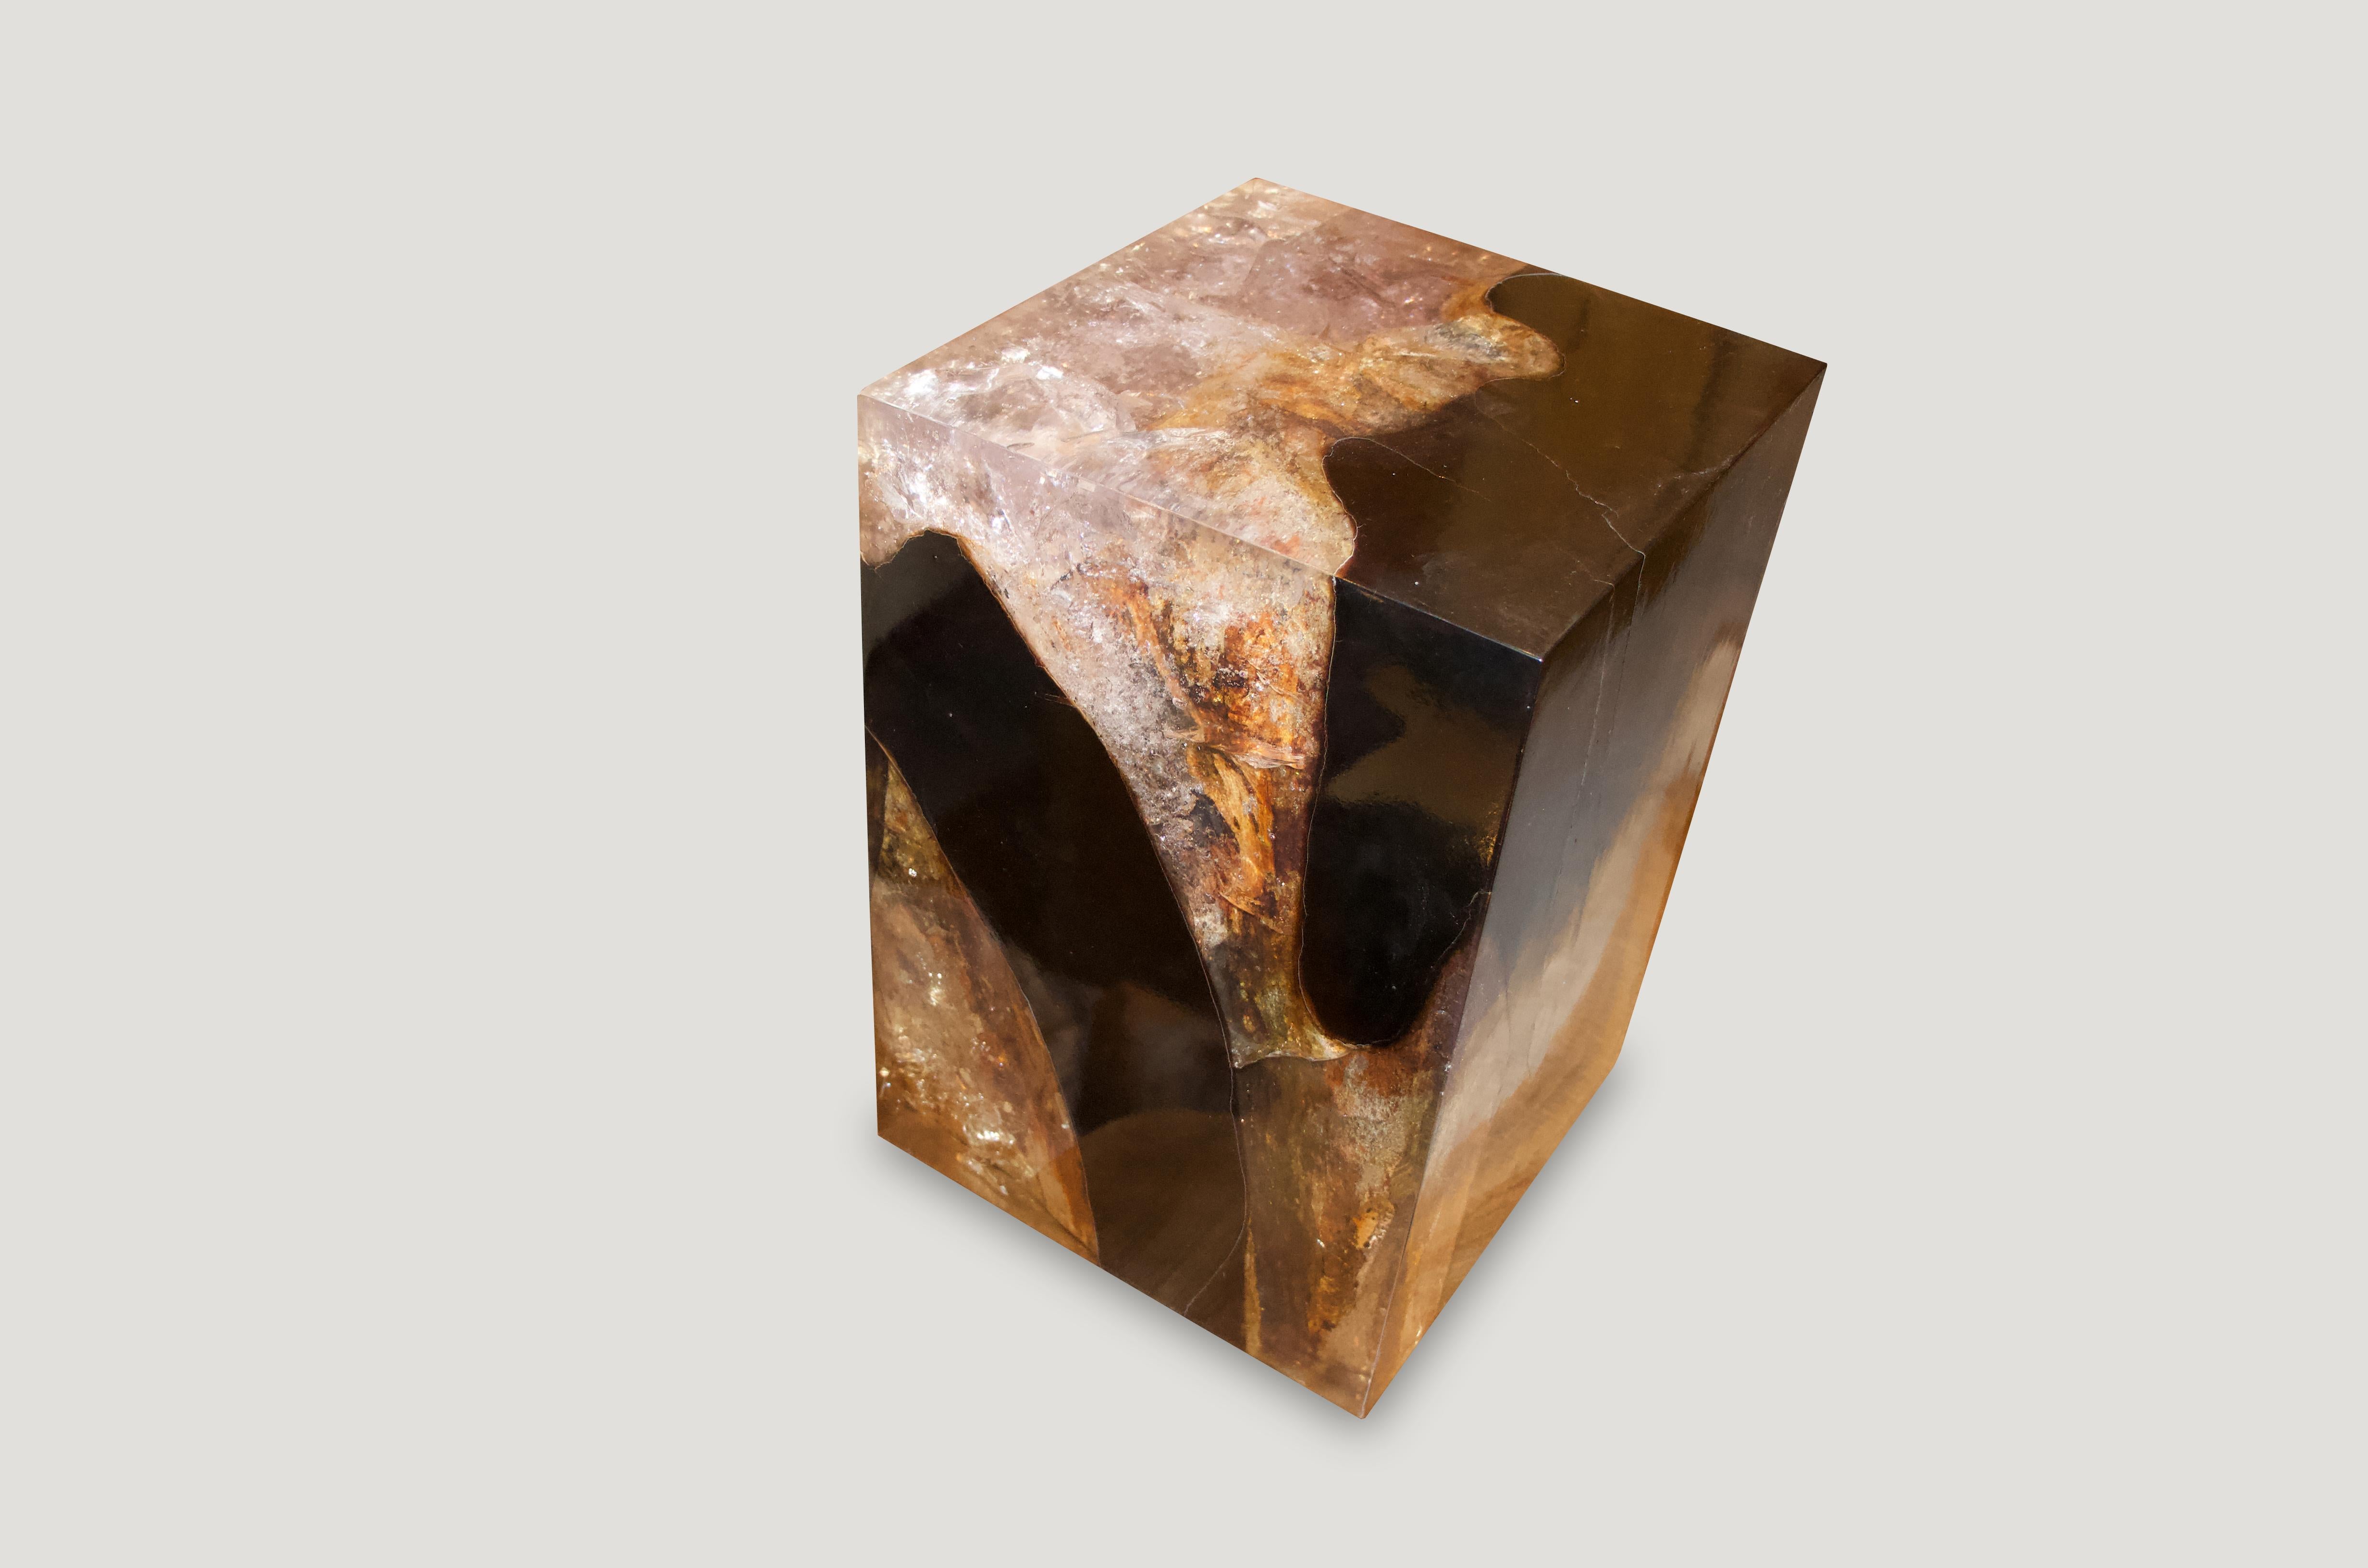 The cracked resin side table is made from teak infused with resin. A dramatic piece due to the depth of the resin, which resembles a unique quartz crystal with many different facets. An impressive addition to any space.

The Cracked Resin